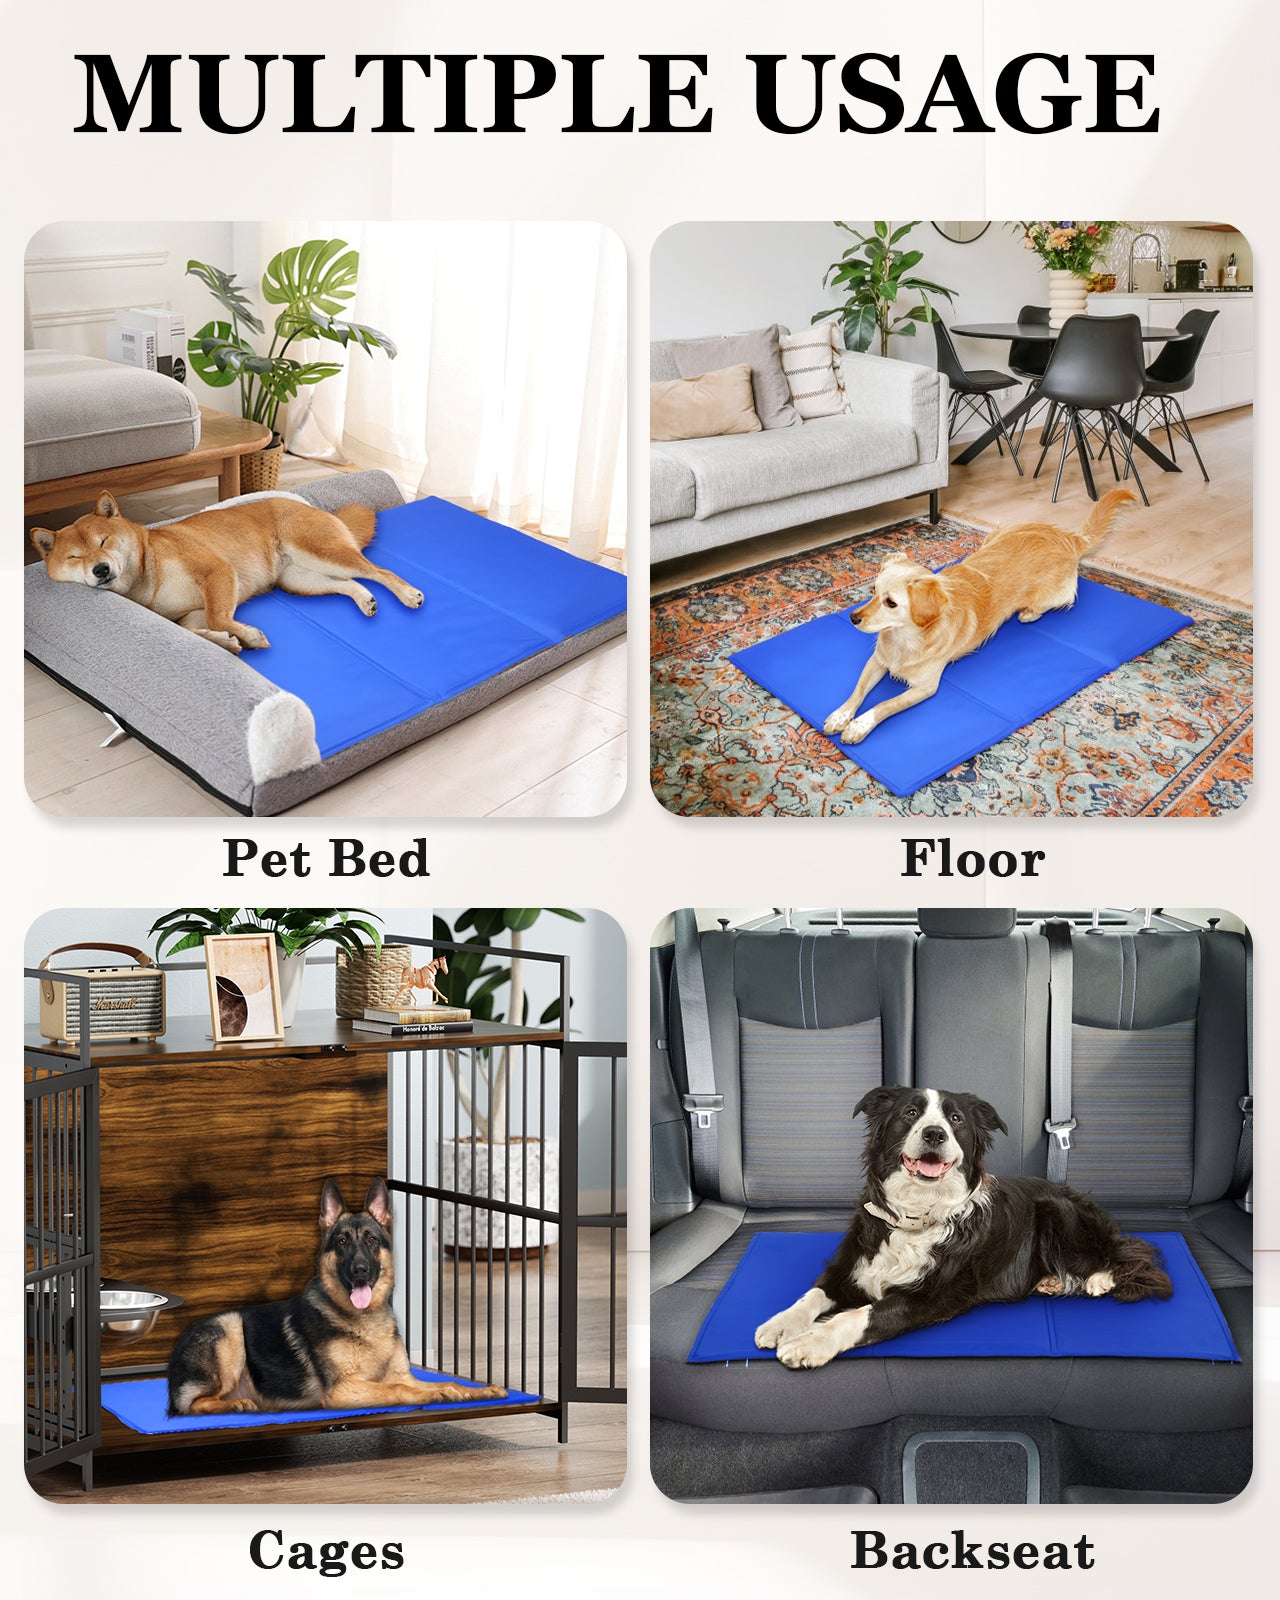 Zacro Dog Cooling Mat, 3 Hour Self Cooling Gel Pad for Dog/Cat, 35” x 19.6” Durable Cooling Dog Bed Mats for Crate/Sofa/Bed/Floor/Car Seats